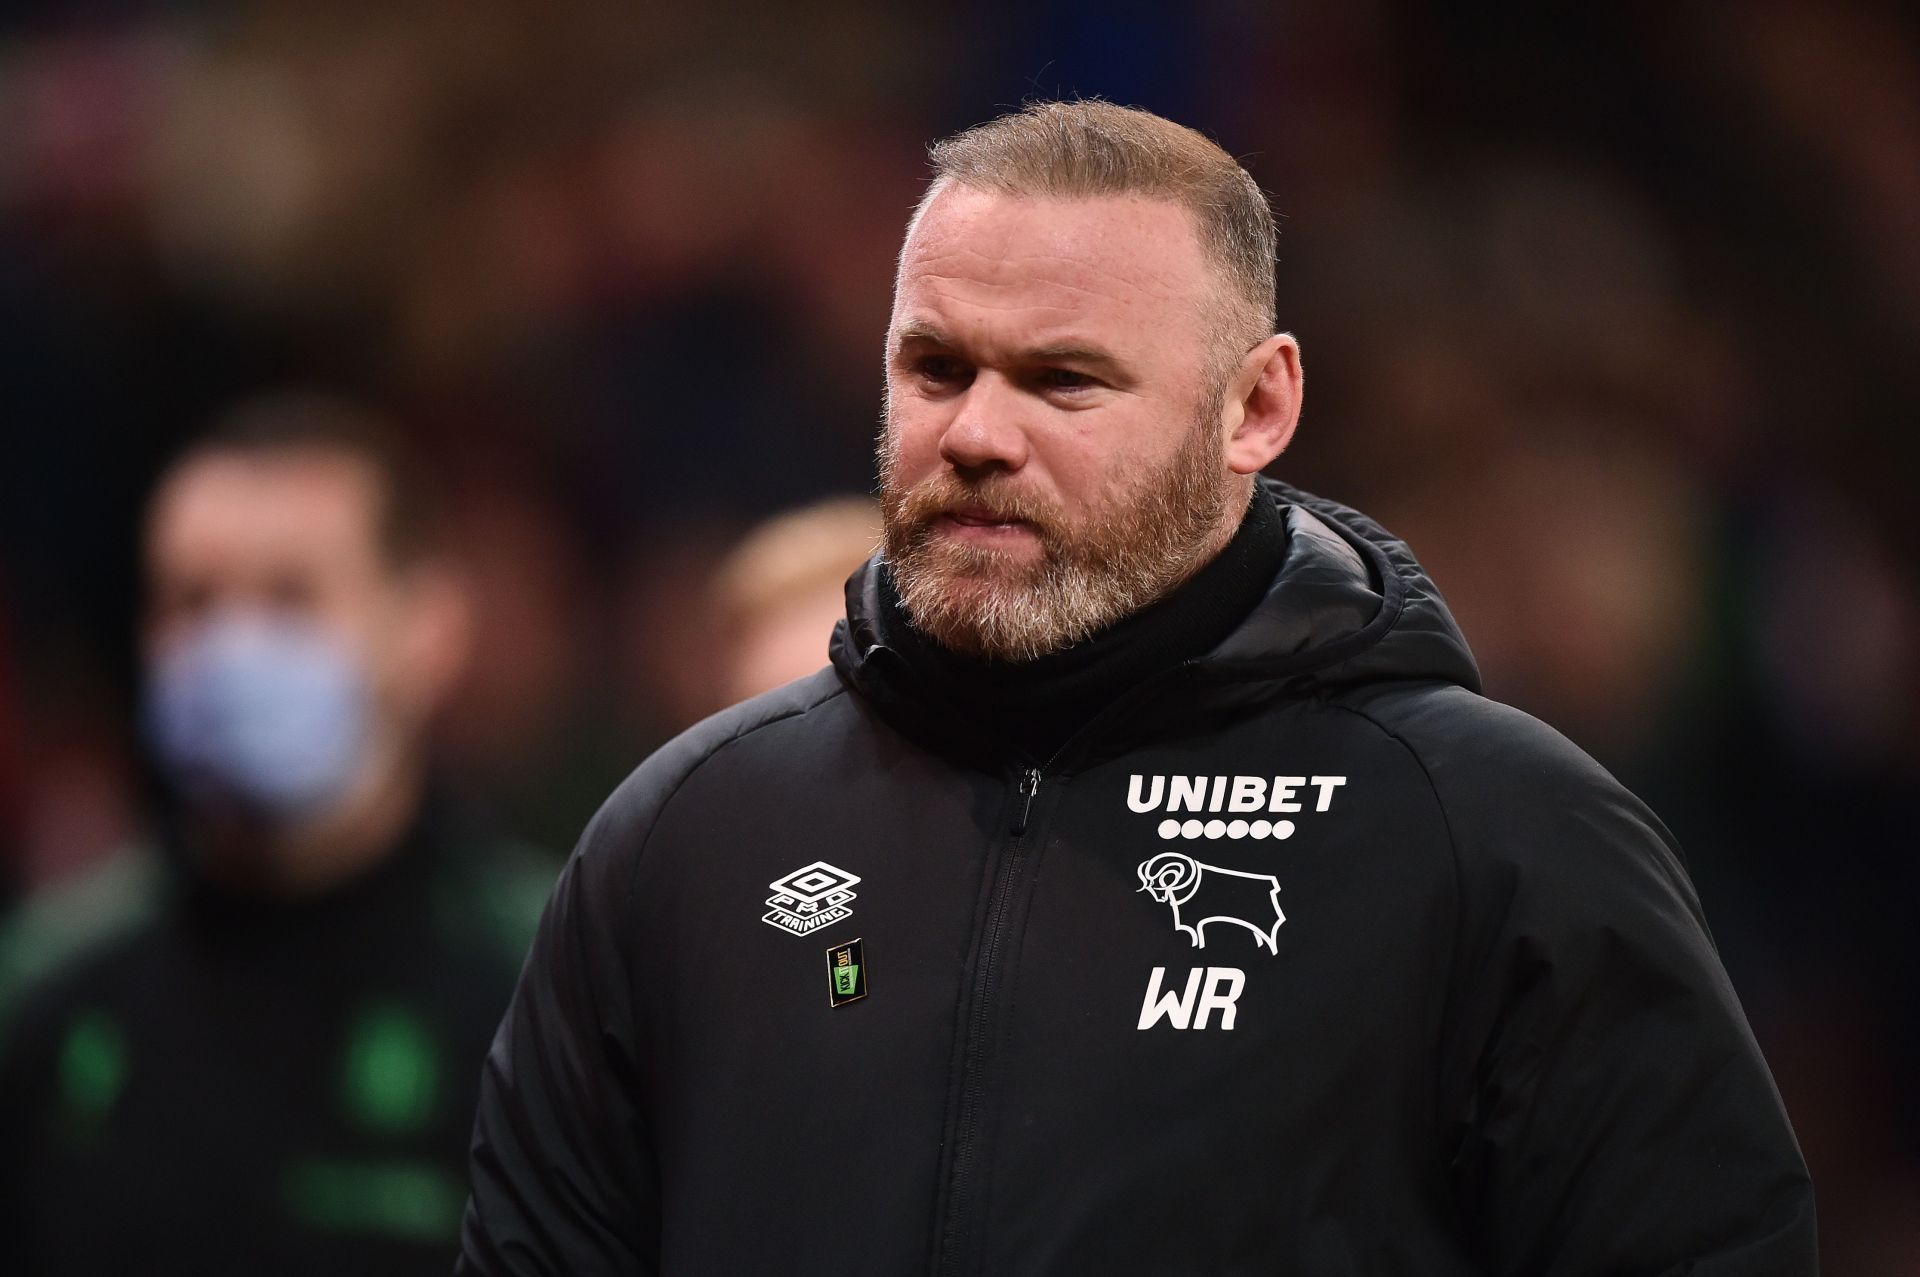 Rooney is now the manager of Derby County